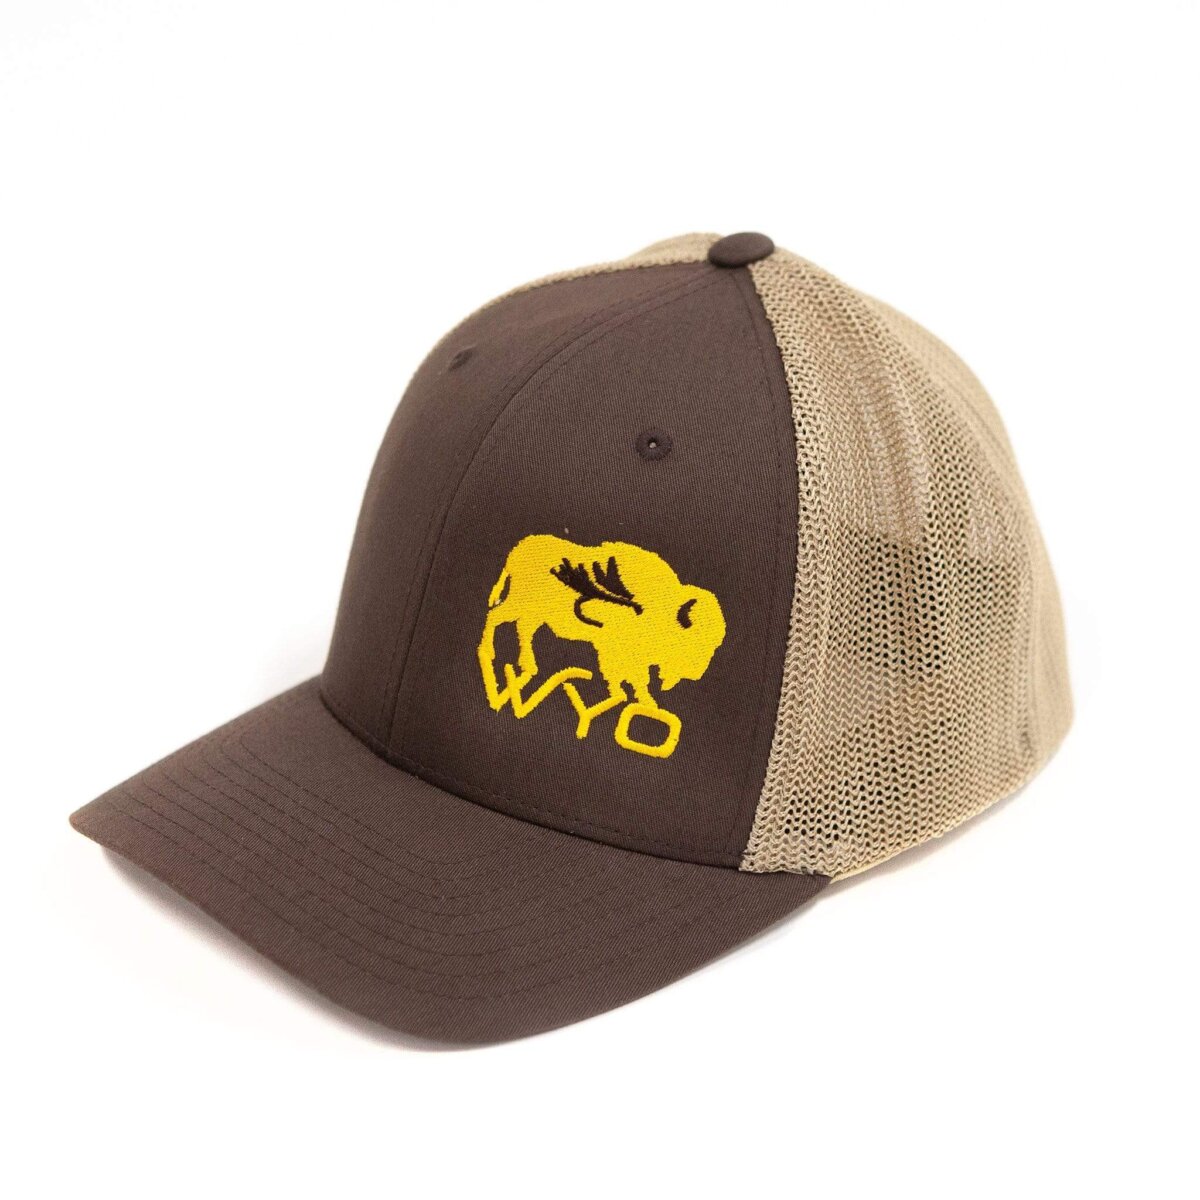 Wyo Fly Bison Flex-Fit Shop - and Brown - Wyoming Hat Mesh Gold